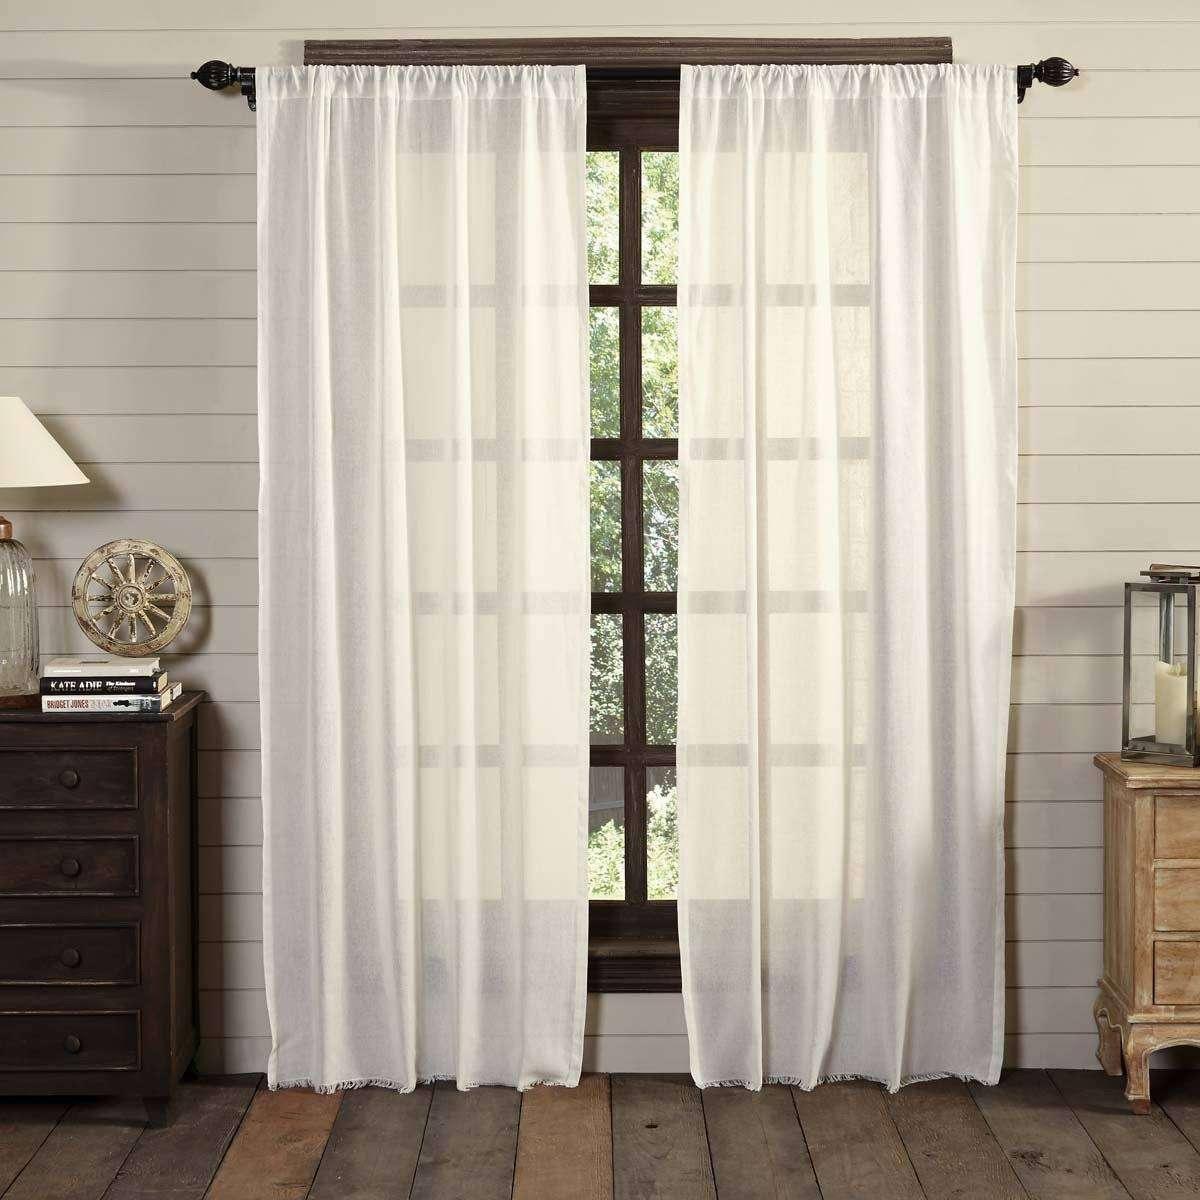 Tobacco Cloth Antique White Panel Curtain Fringed Set of 2 84x40 VHC Brands Curtains VHC Brands 